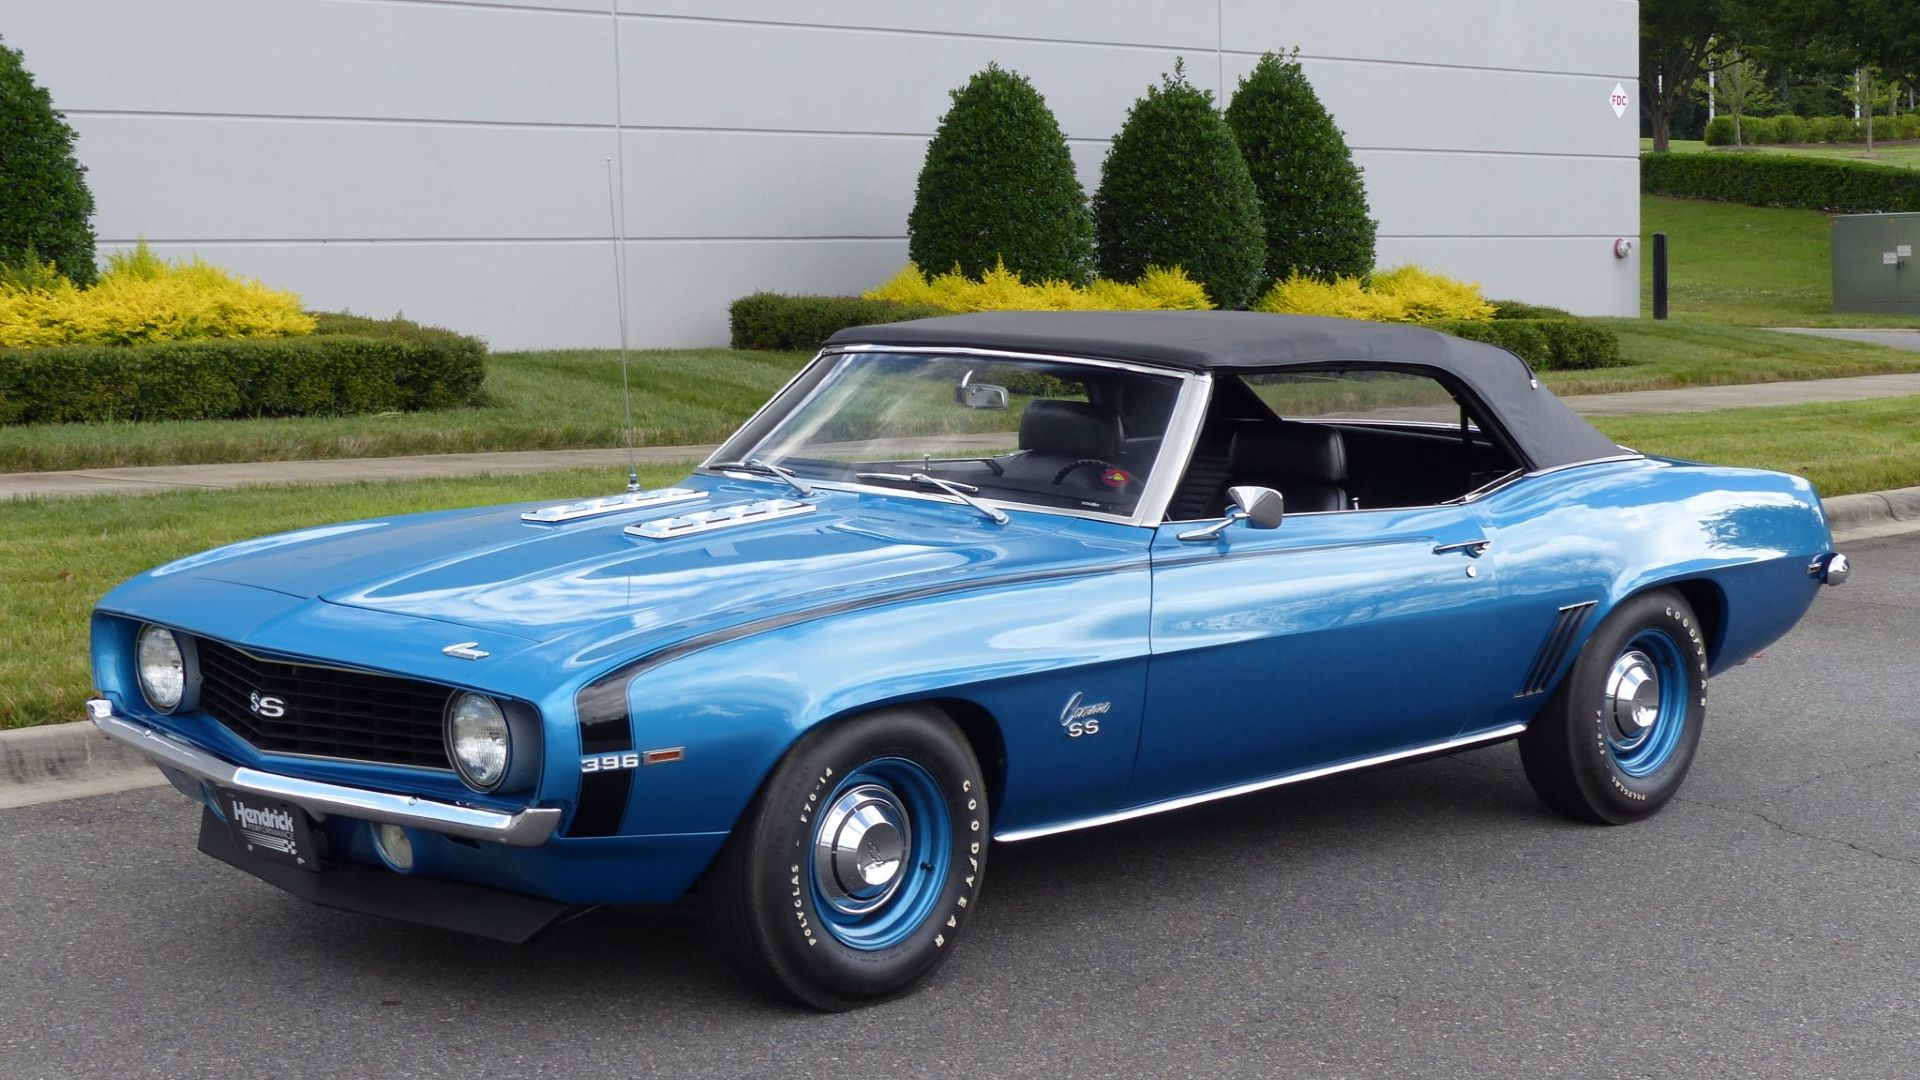 10 Reasons Why The 1969 Chevy Camaro SS Is The Ultimate Muscle Car